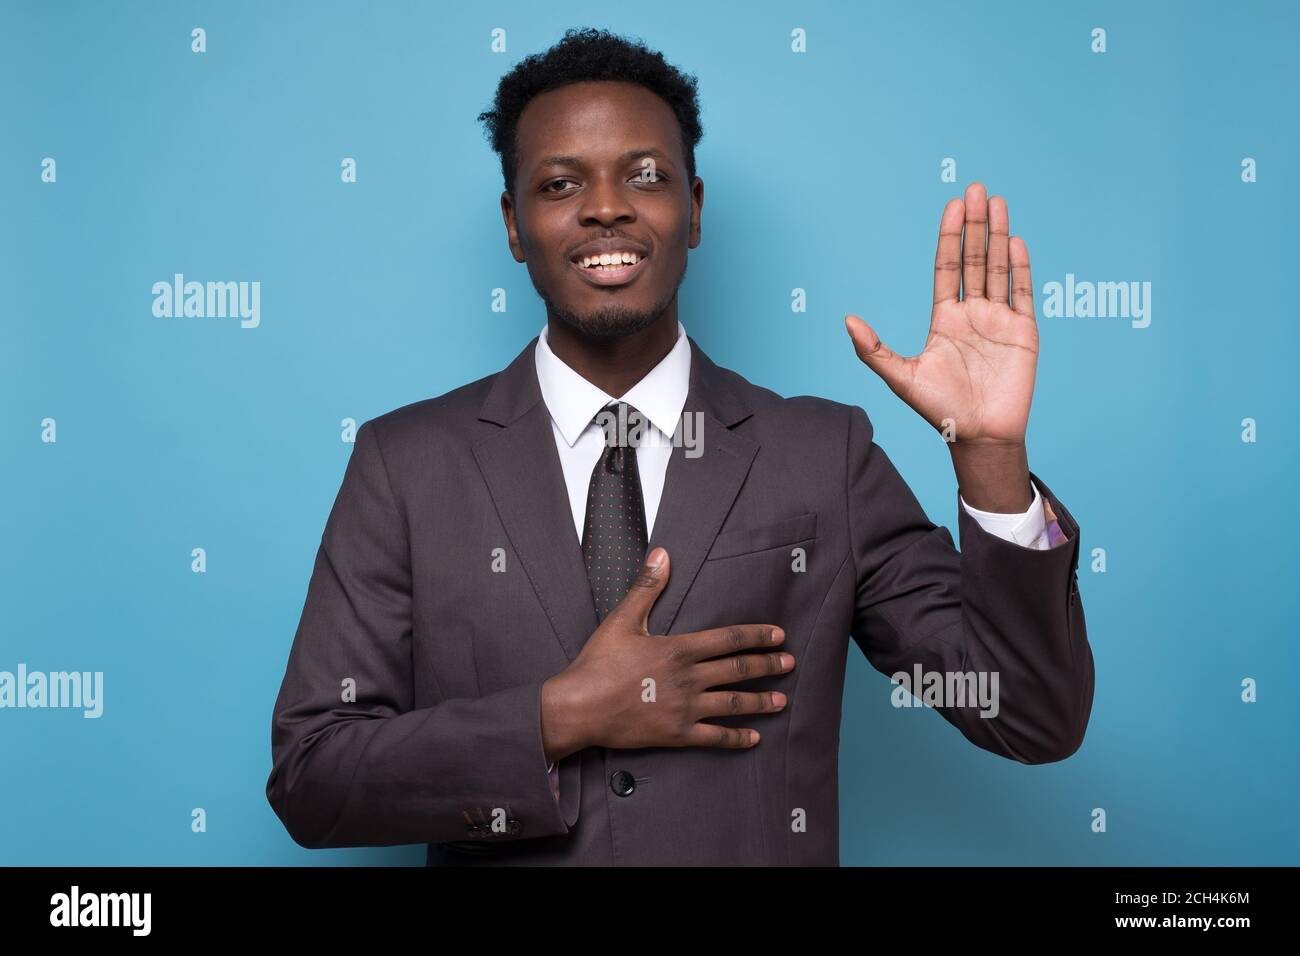 African american man making a loyalty promise oath Stock Photo